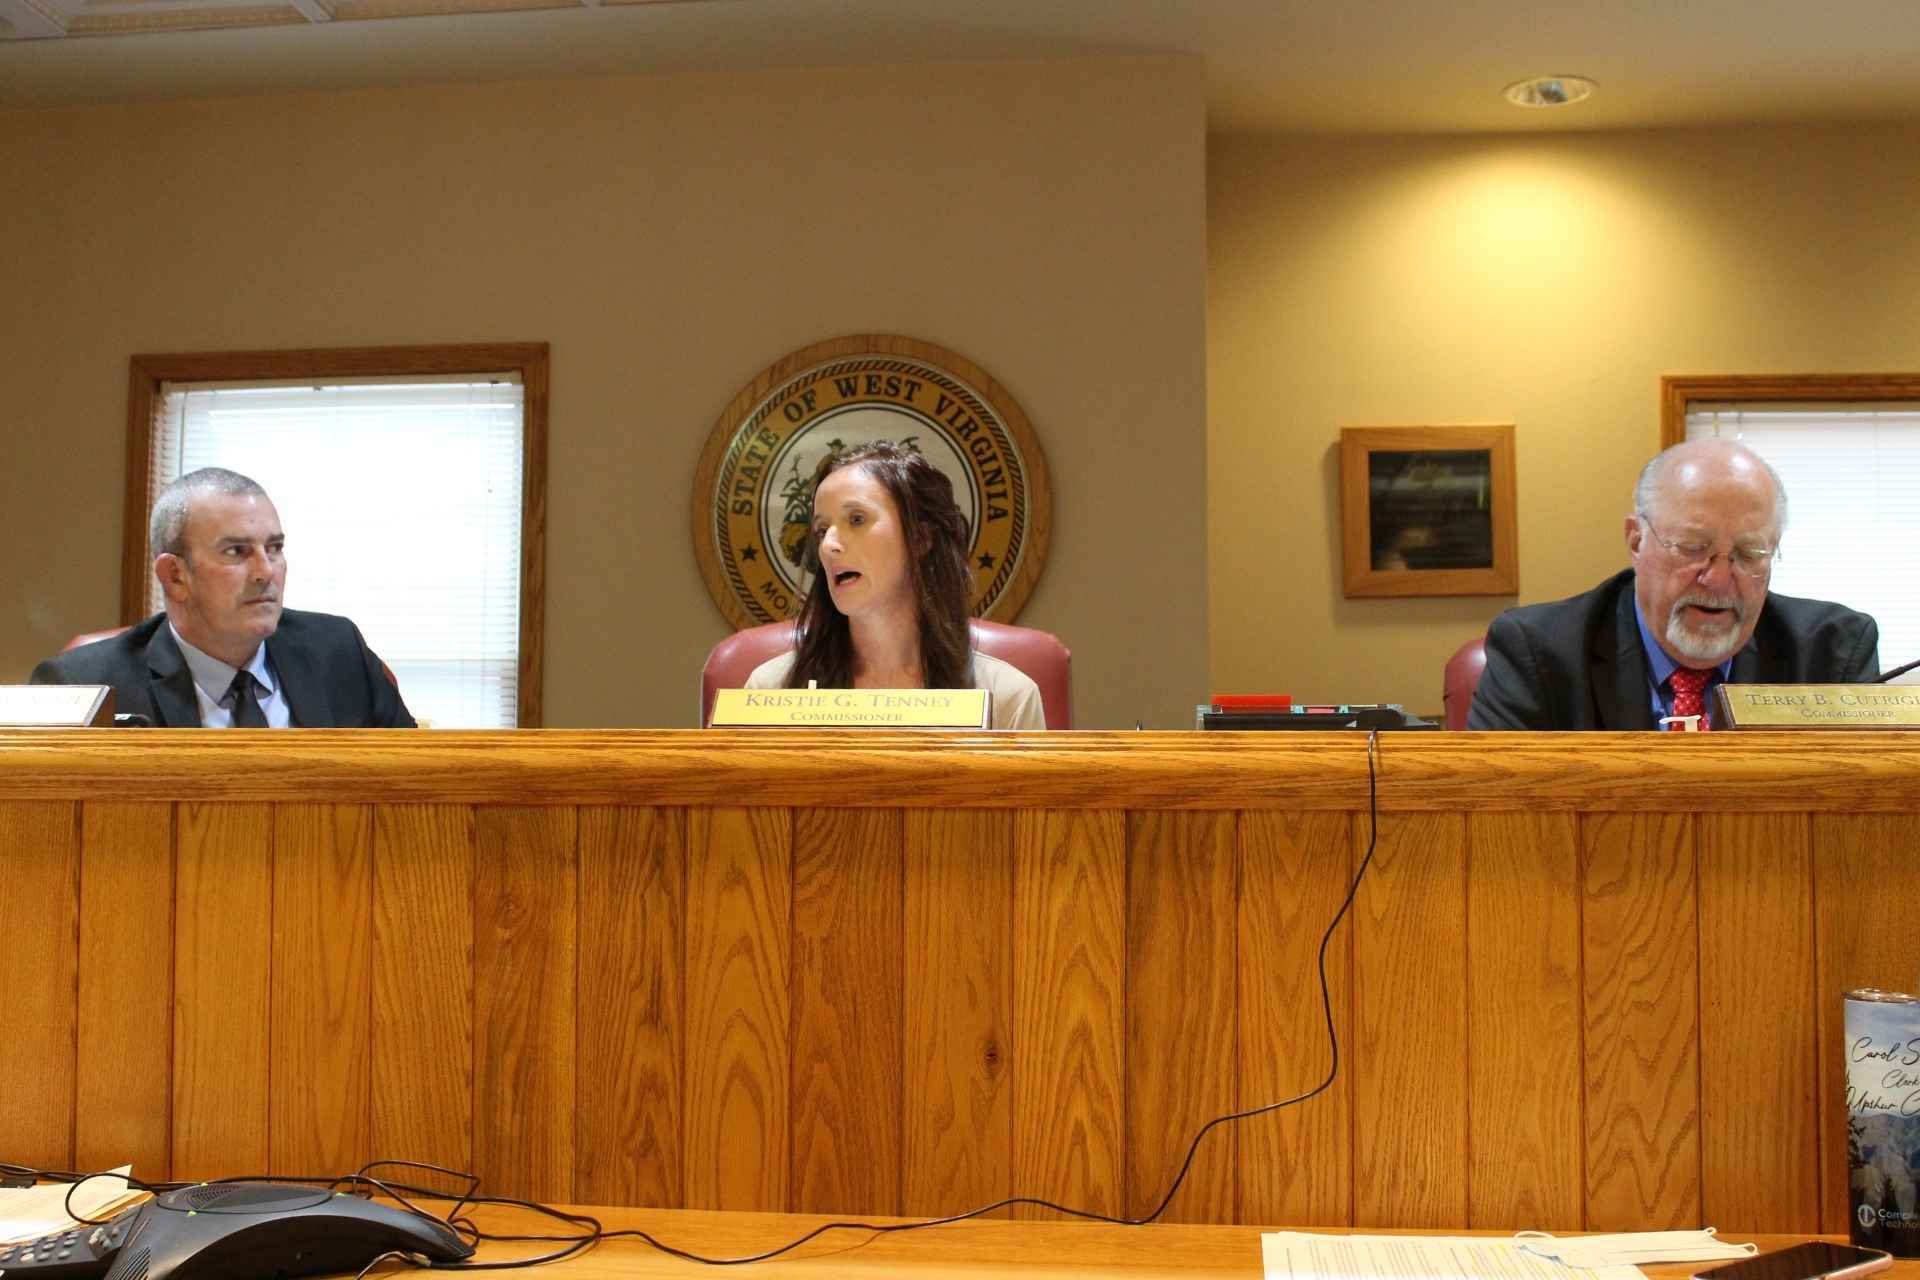 County commissioners Sam Nolte, Kristie Tenney and Terry Cutright speak via teleconference with Justin Bowers.